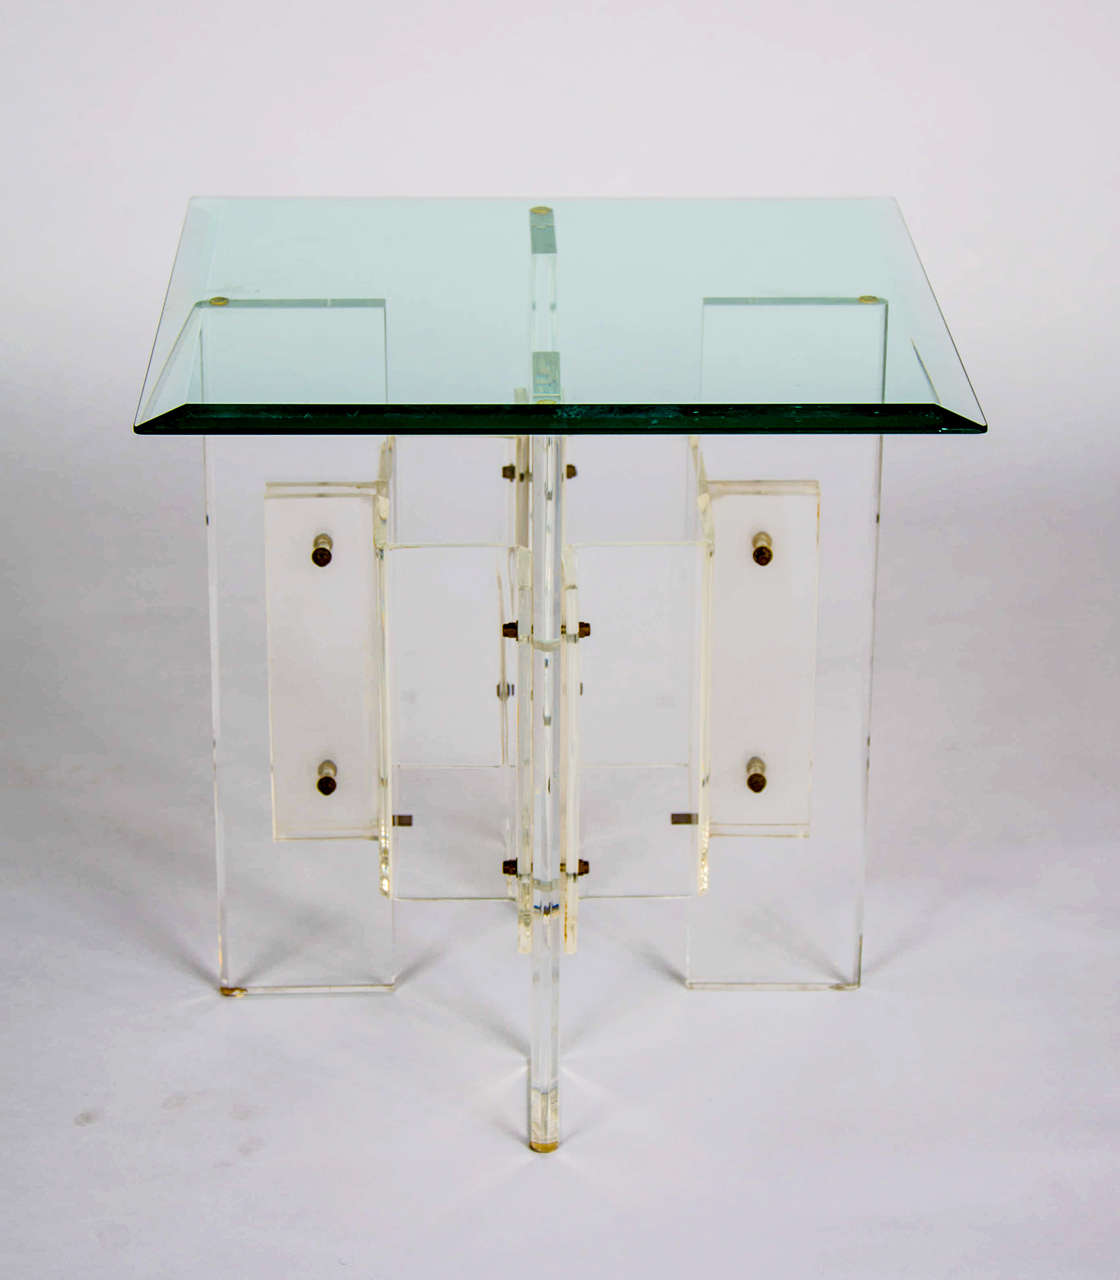 Two glass and perspex side tables from the 1970s.

Maker unknown.